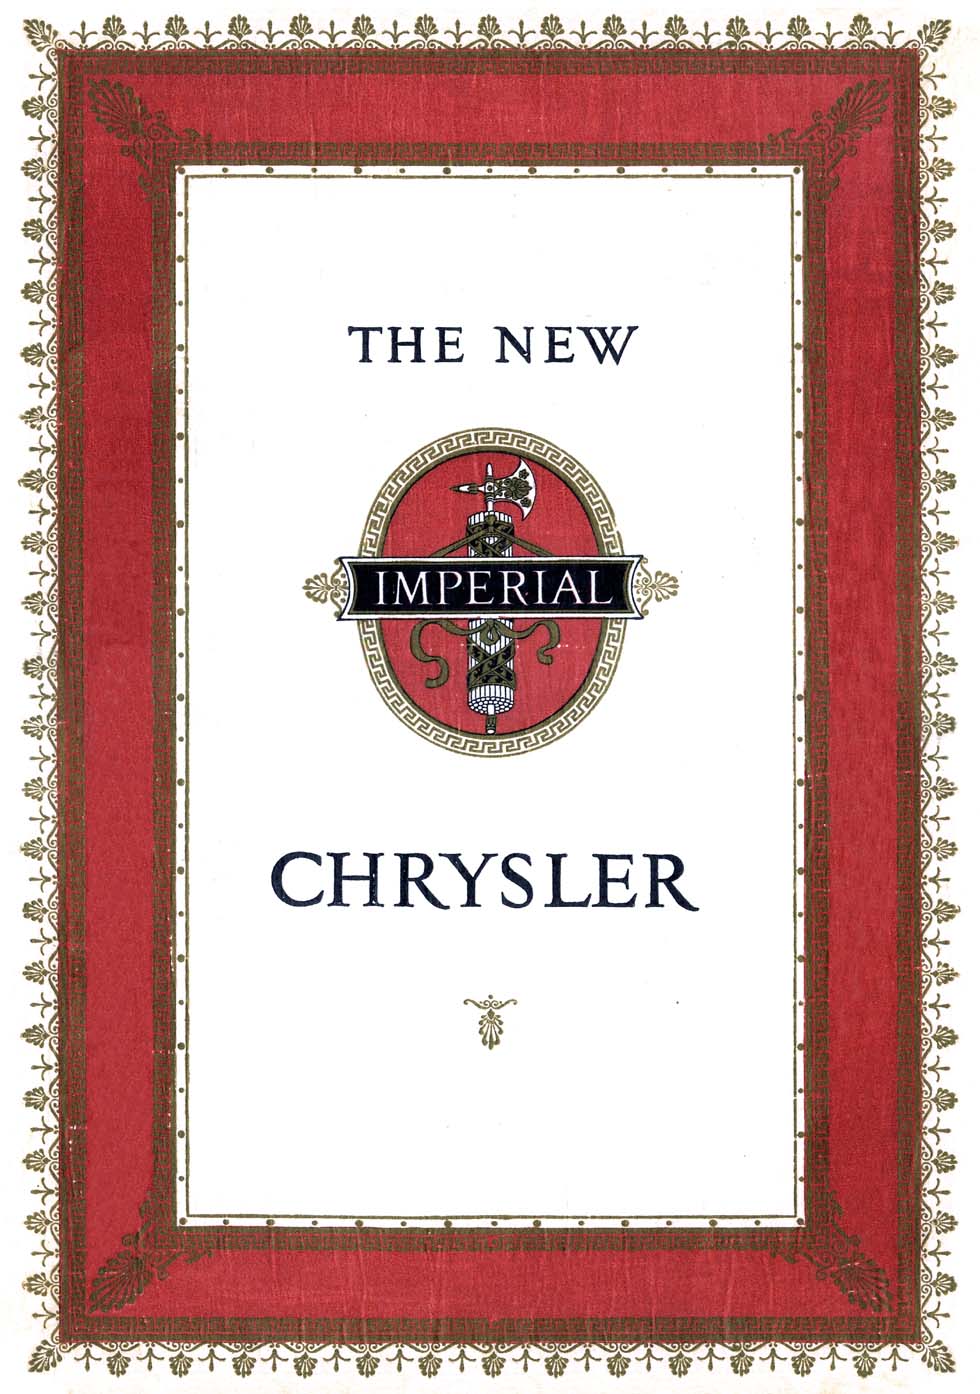 1926 Chrysler Imperial Brochure Page 5